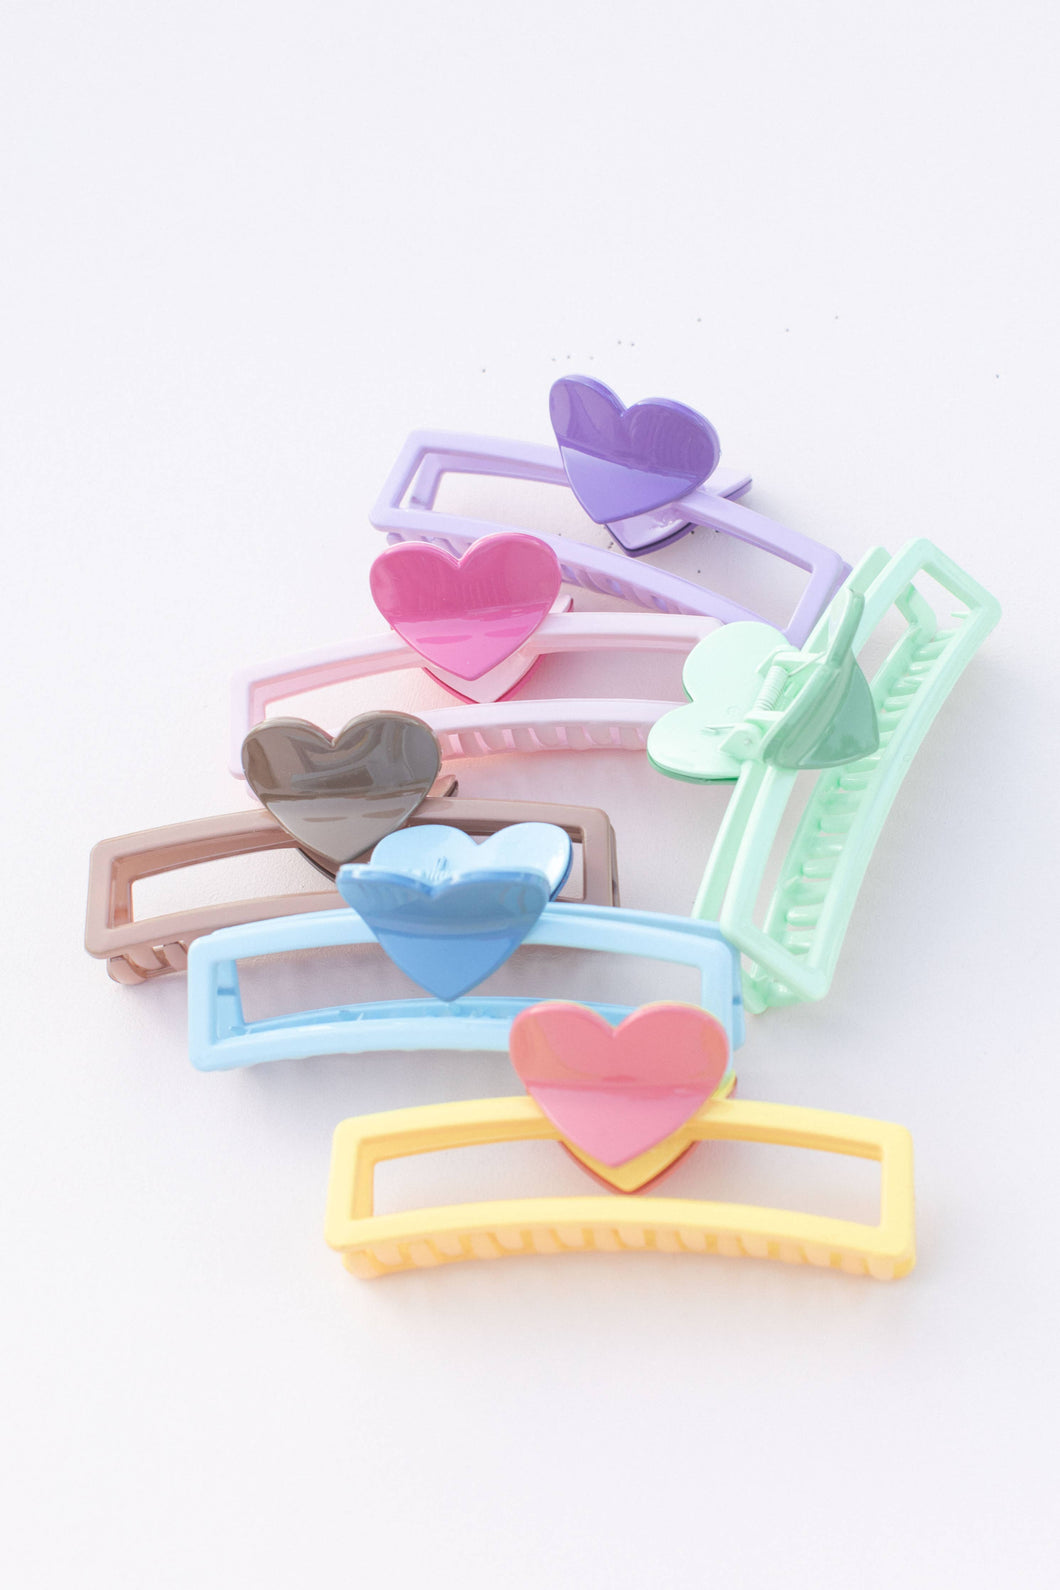 5 inch hair claw clips, in strawberry and chocolate pastel colors with a heart for the handle that opens and closes the clip. 